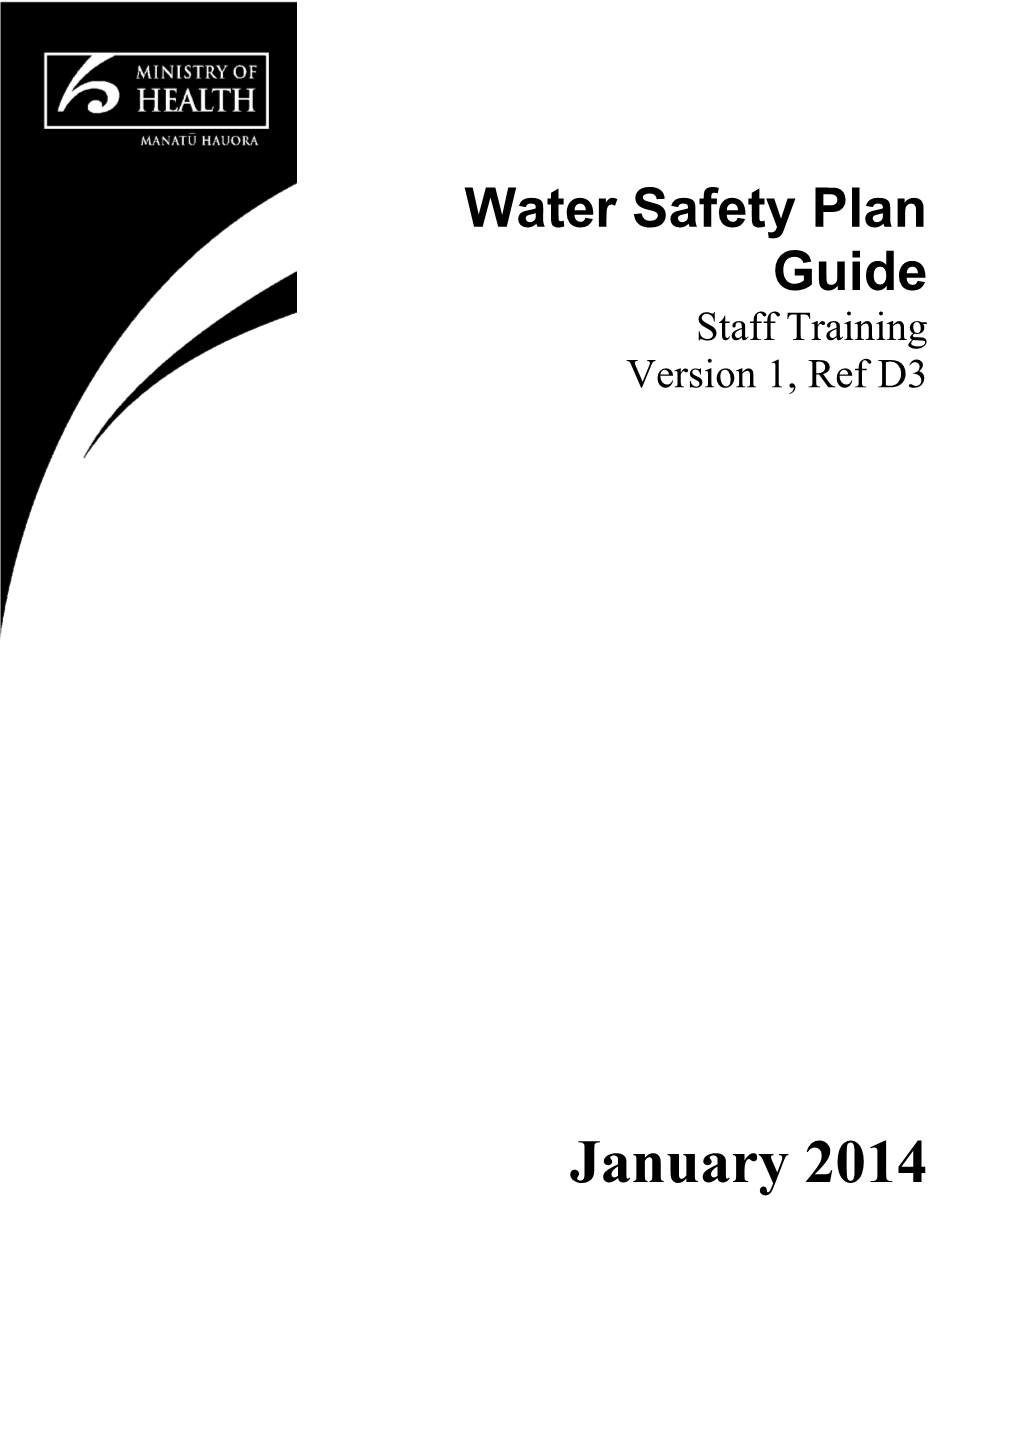 Water Safety Plan Guide: Treatment Processes Membrane Filtration